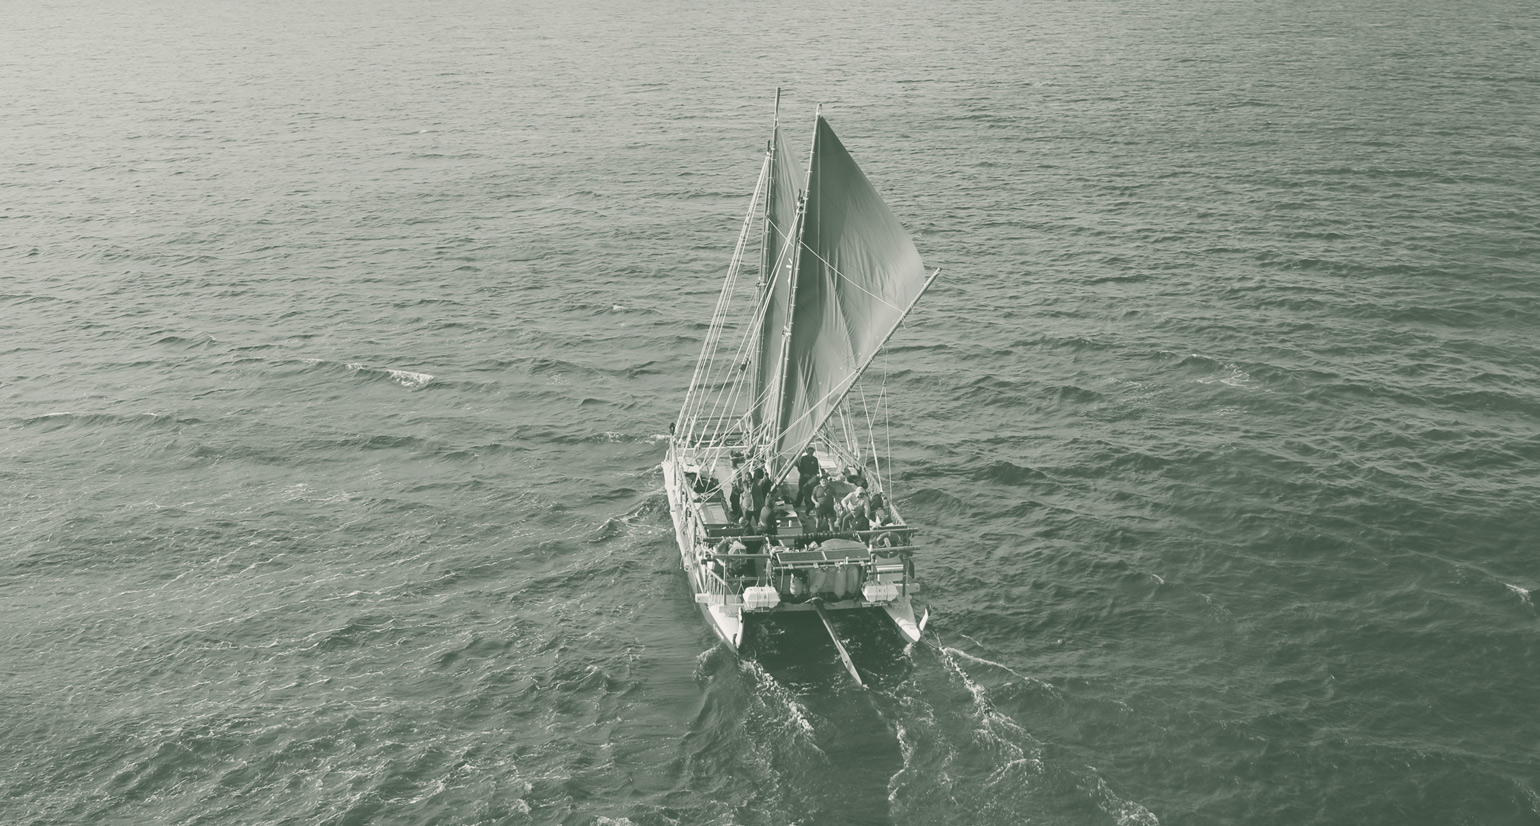  A double hulled waka is pictured from a birds-eye view above a calm sea. People can be seen on the deck below two large sails